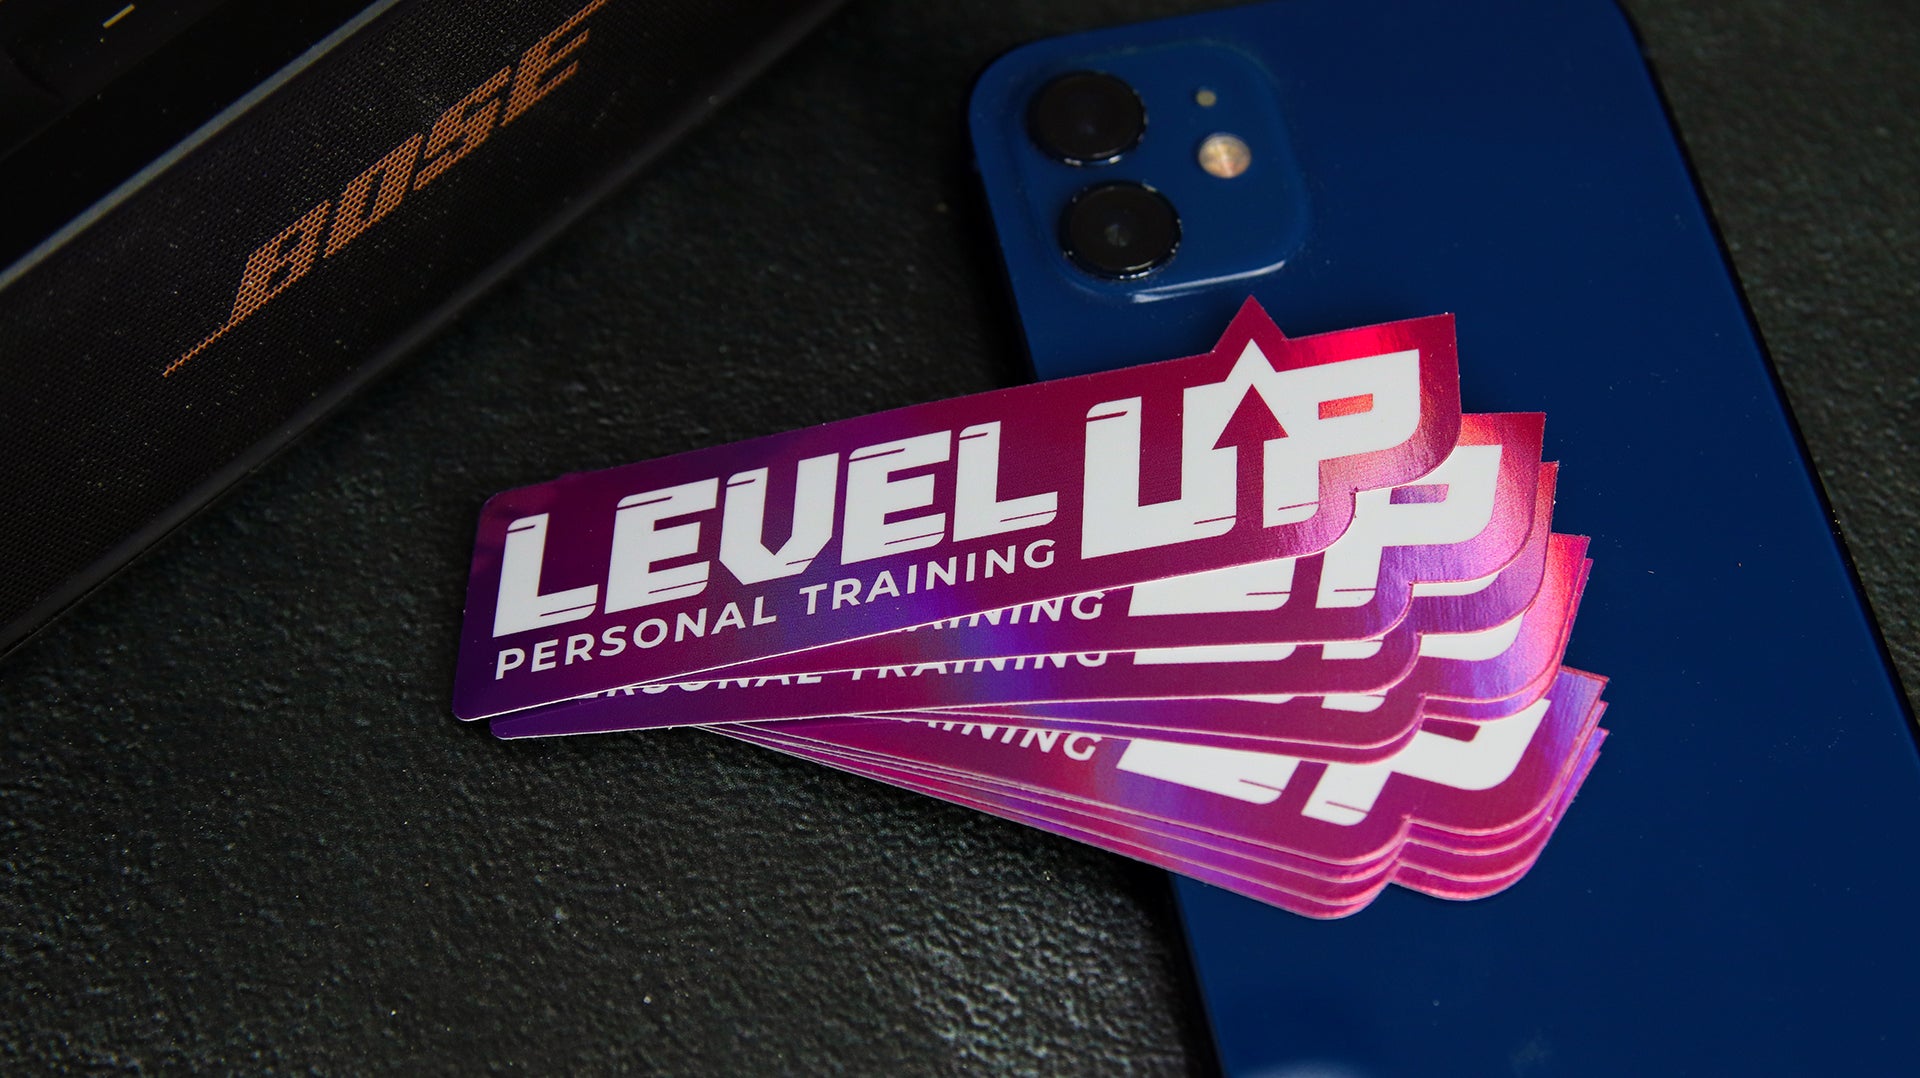 Stack of eco-friendly holographic die cut samples with level up logo